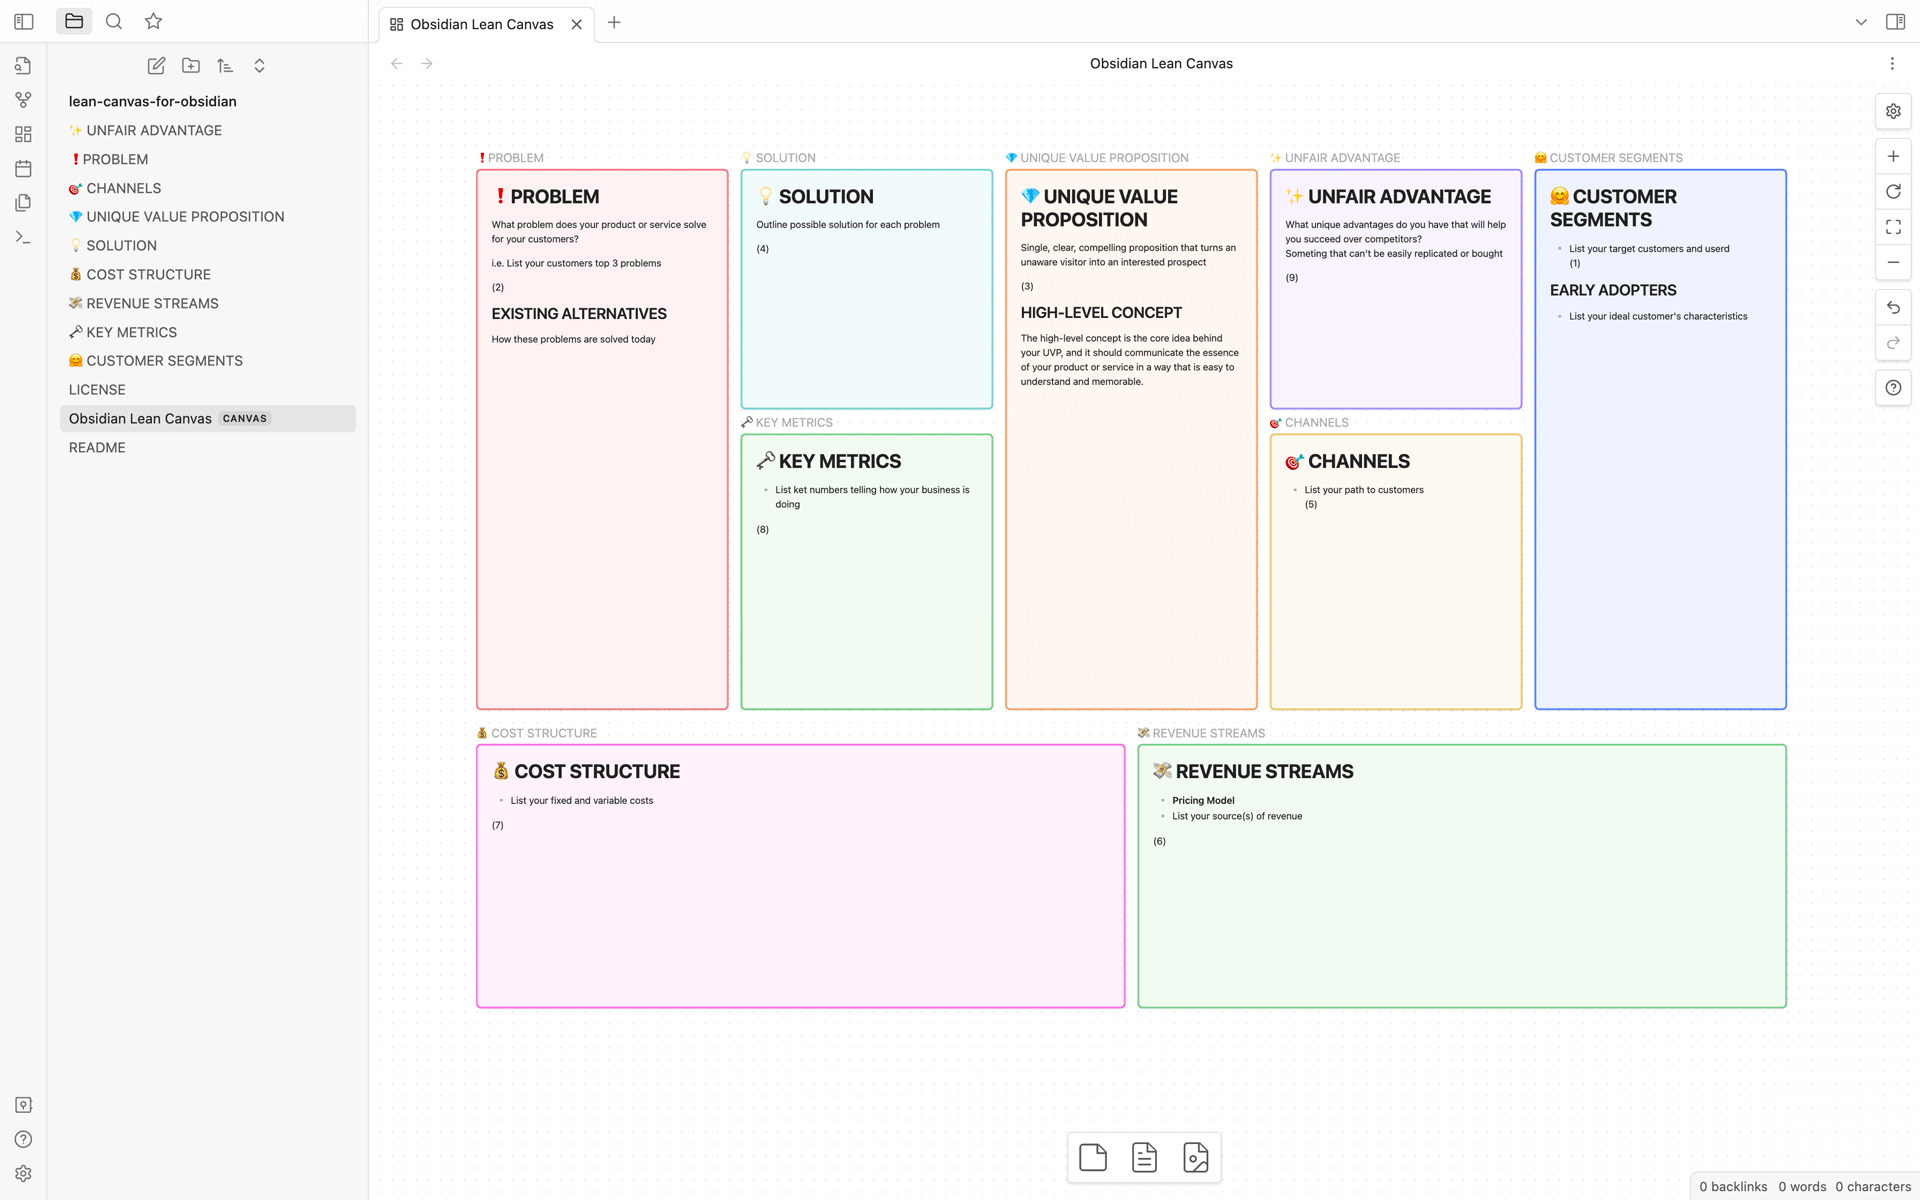 Lean Canvas Template for Obsidian, a one-page business plan template for Obsidian